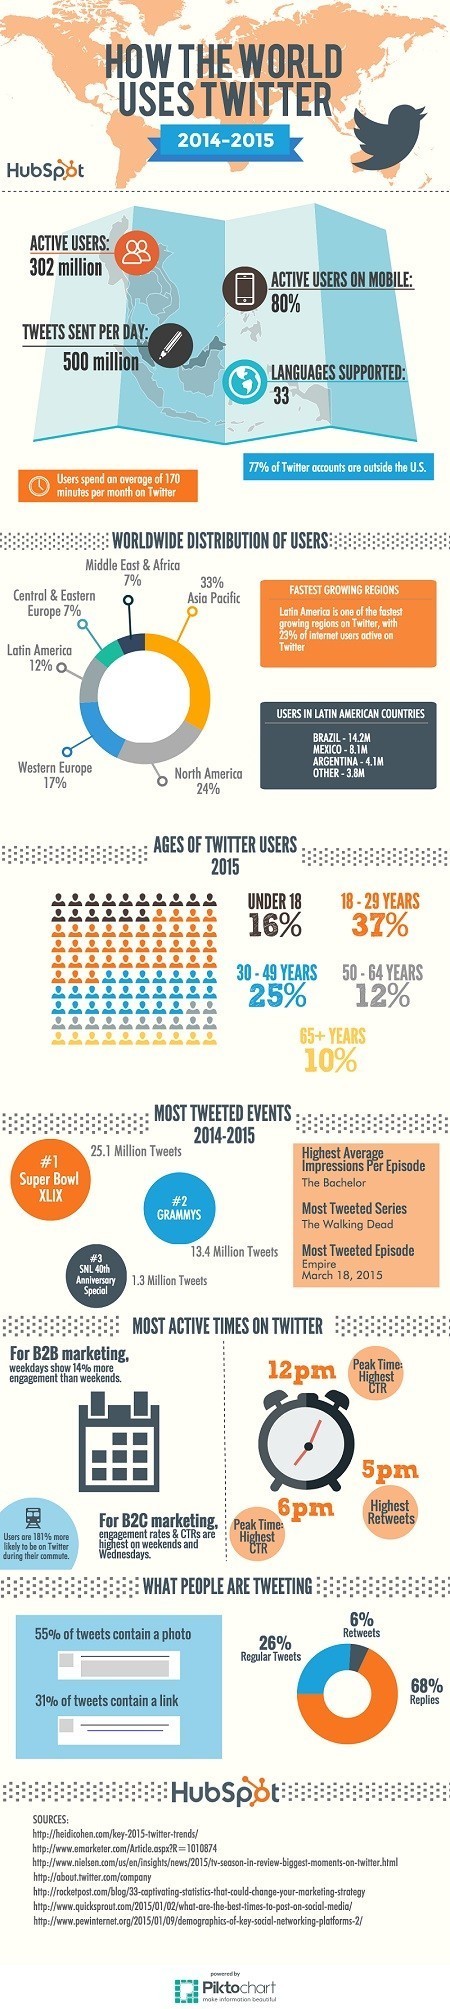 How the World Uses Twitter [Infographic] | Distance Learning, mLearning, Digital Education, Technology | Scoop.it